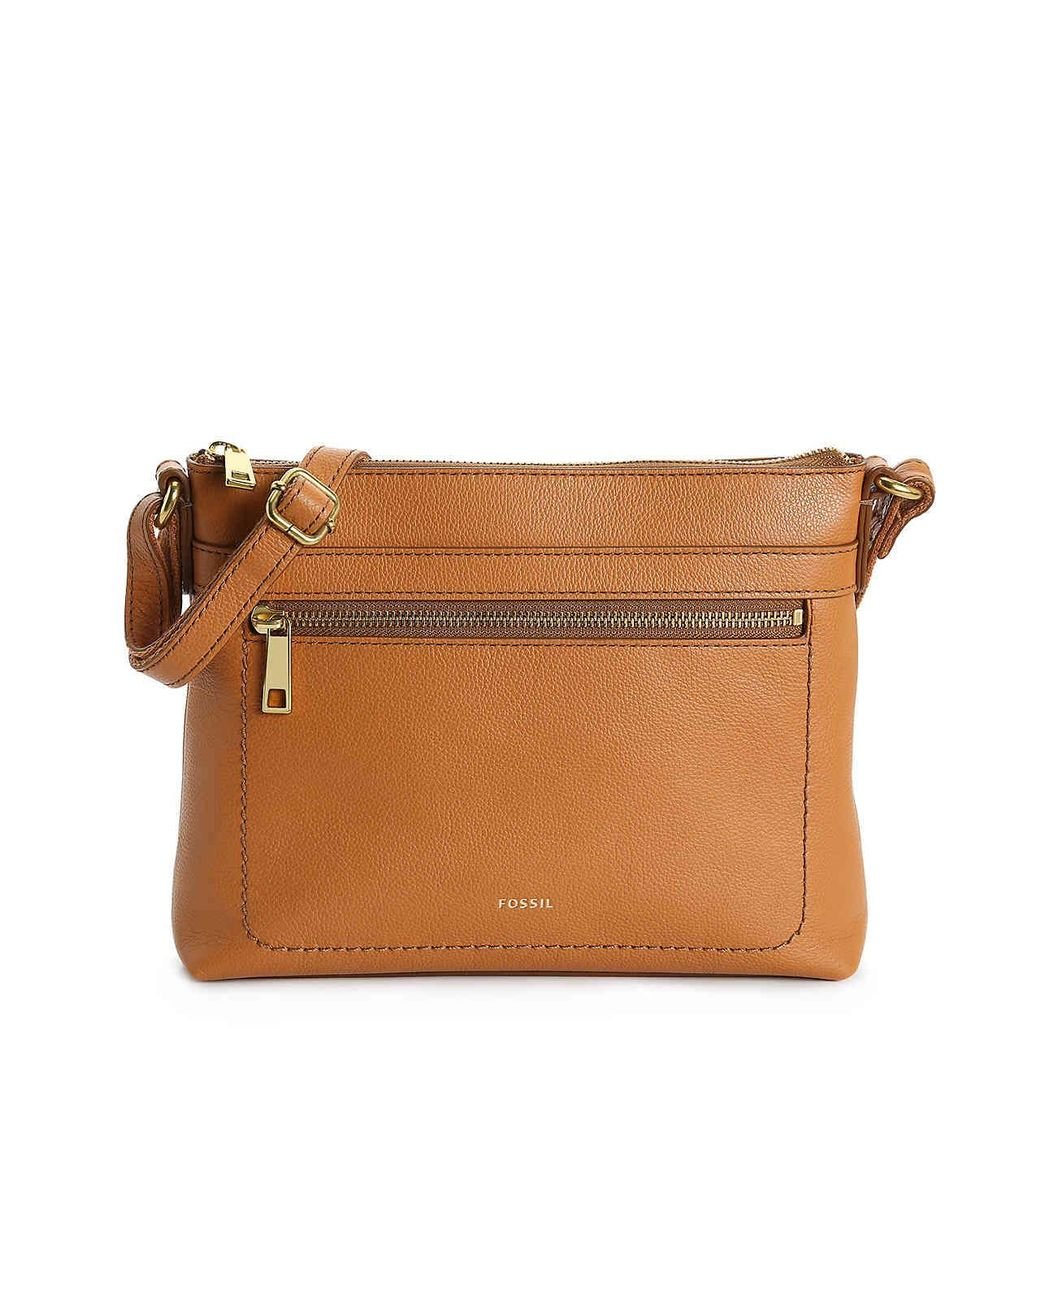 Fossil Evie Leather Crossbody Bag in Tan (Brown) - Lyst